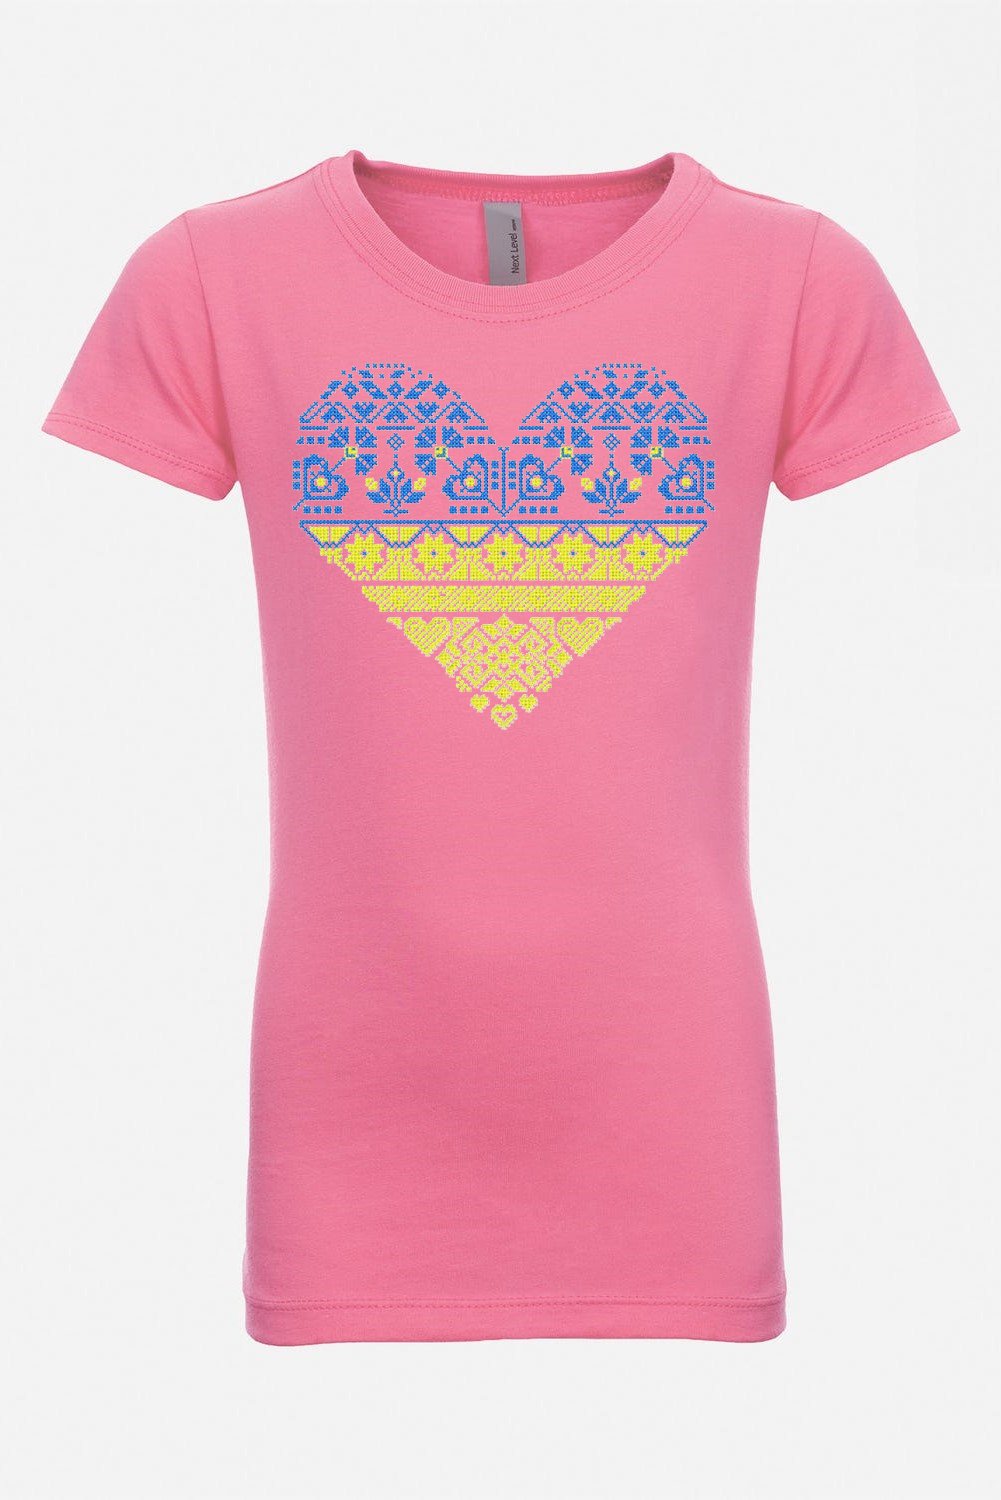 Girl's t-shirt "Blue and yellow heart"